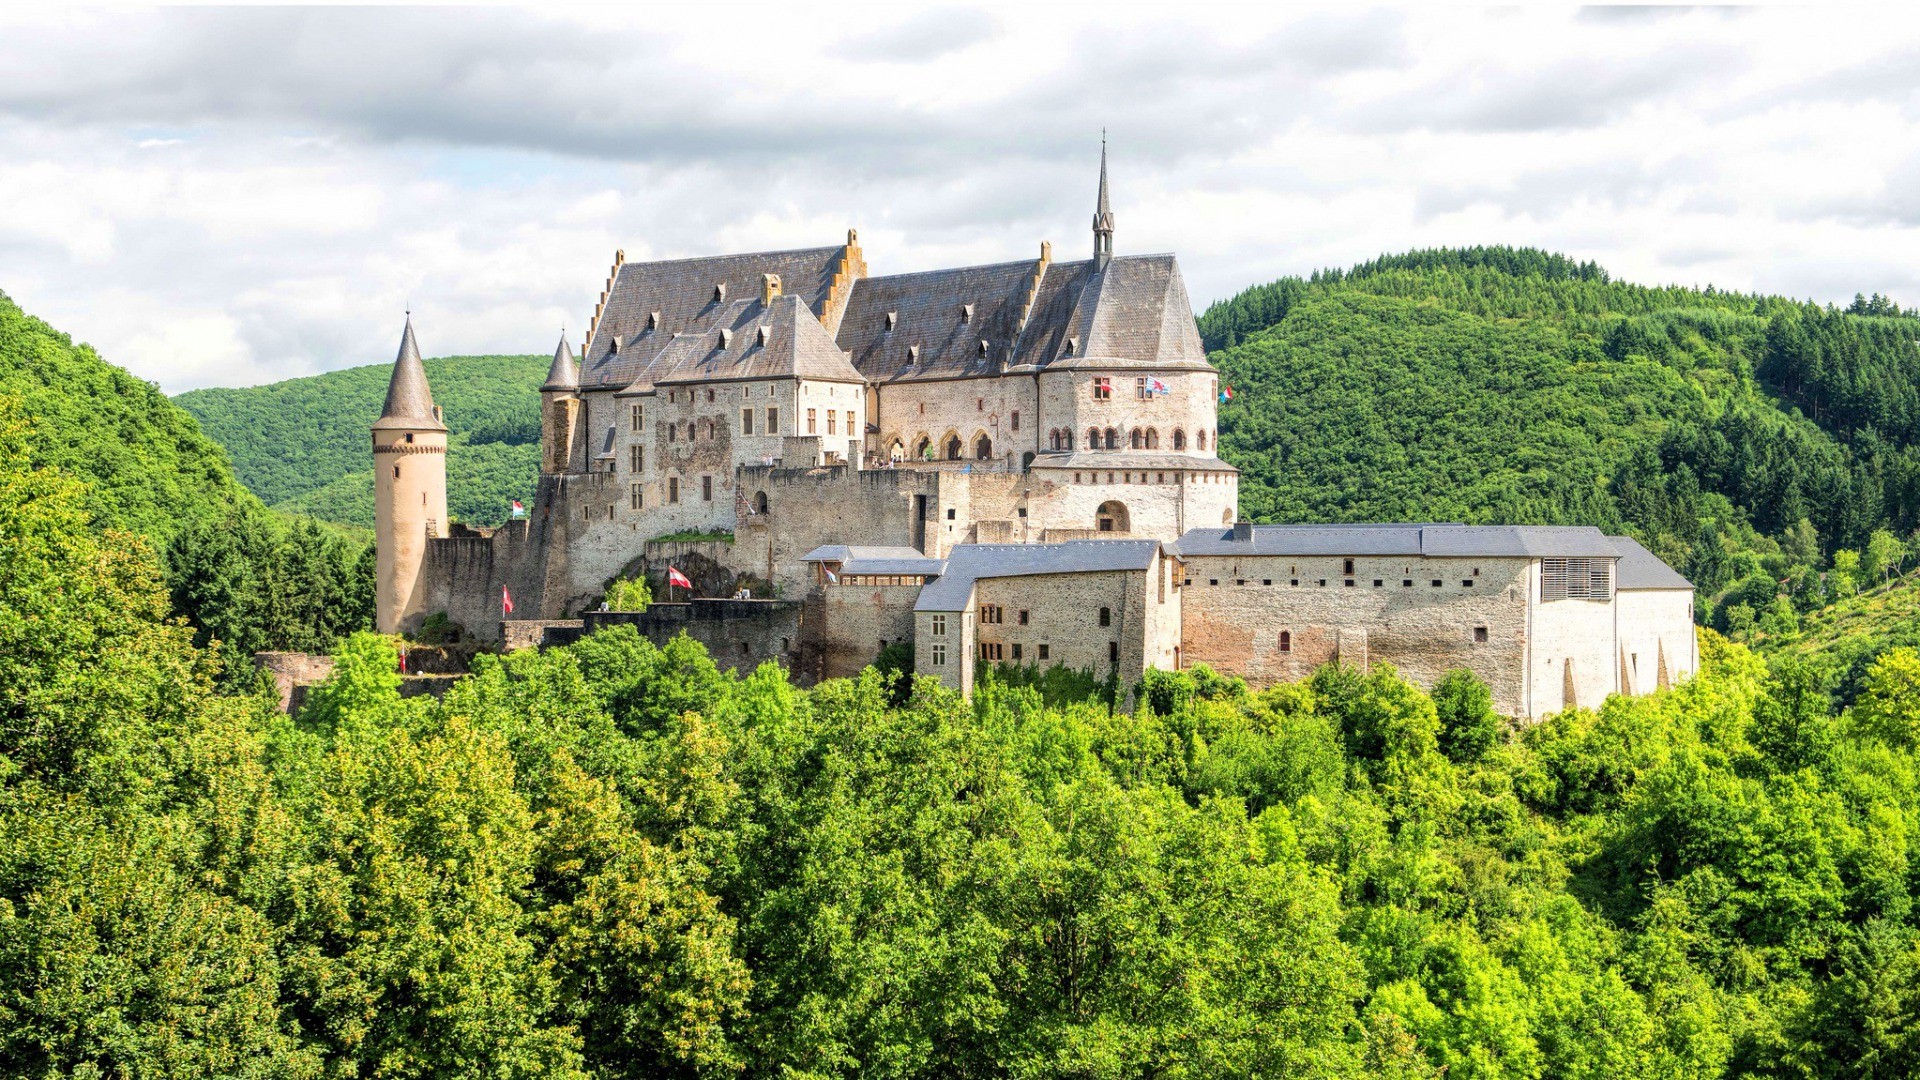 General 1920x1080 architecture castle nature landscape hills trees forest Luxemburg tower flag clouds wall Luxembourg